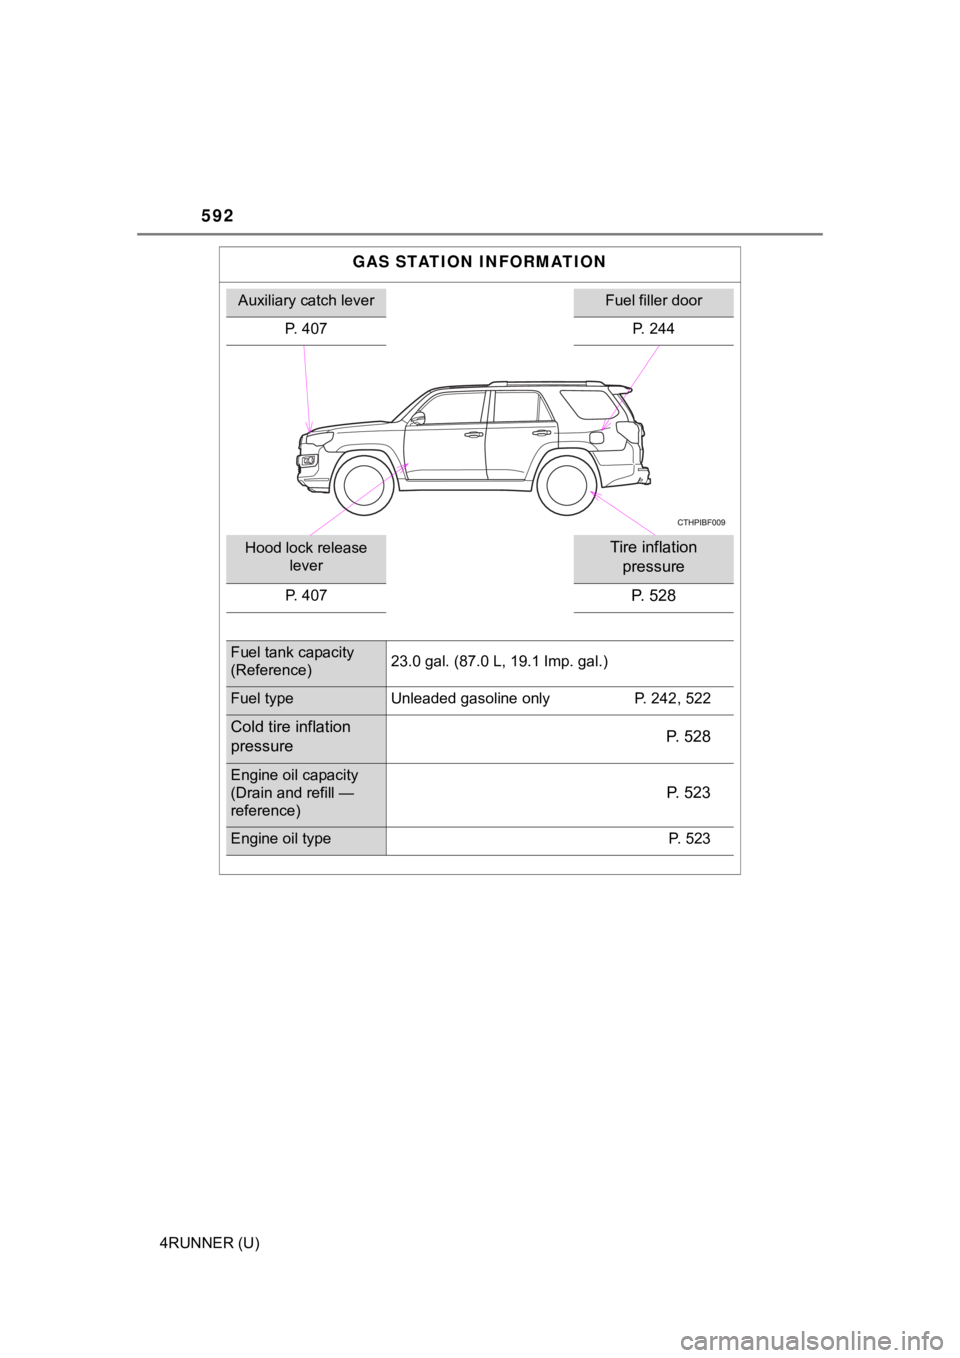 TOYOTA 4RUNNER 2021  Owners Manual (in English) 592
4RUNNER (U)
GAS STATION INFORMATION
Auxiliary catch leverFuel filler door
P. 407 P. 244
Hood lock release 
leverTire inflation 
pressure
P. 407P. 528
Fuel tank capacity
(Reference) 23.0 gal. (87.0